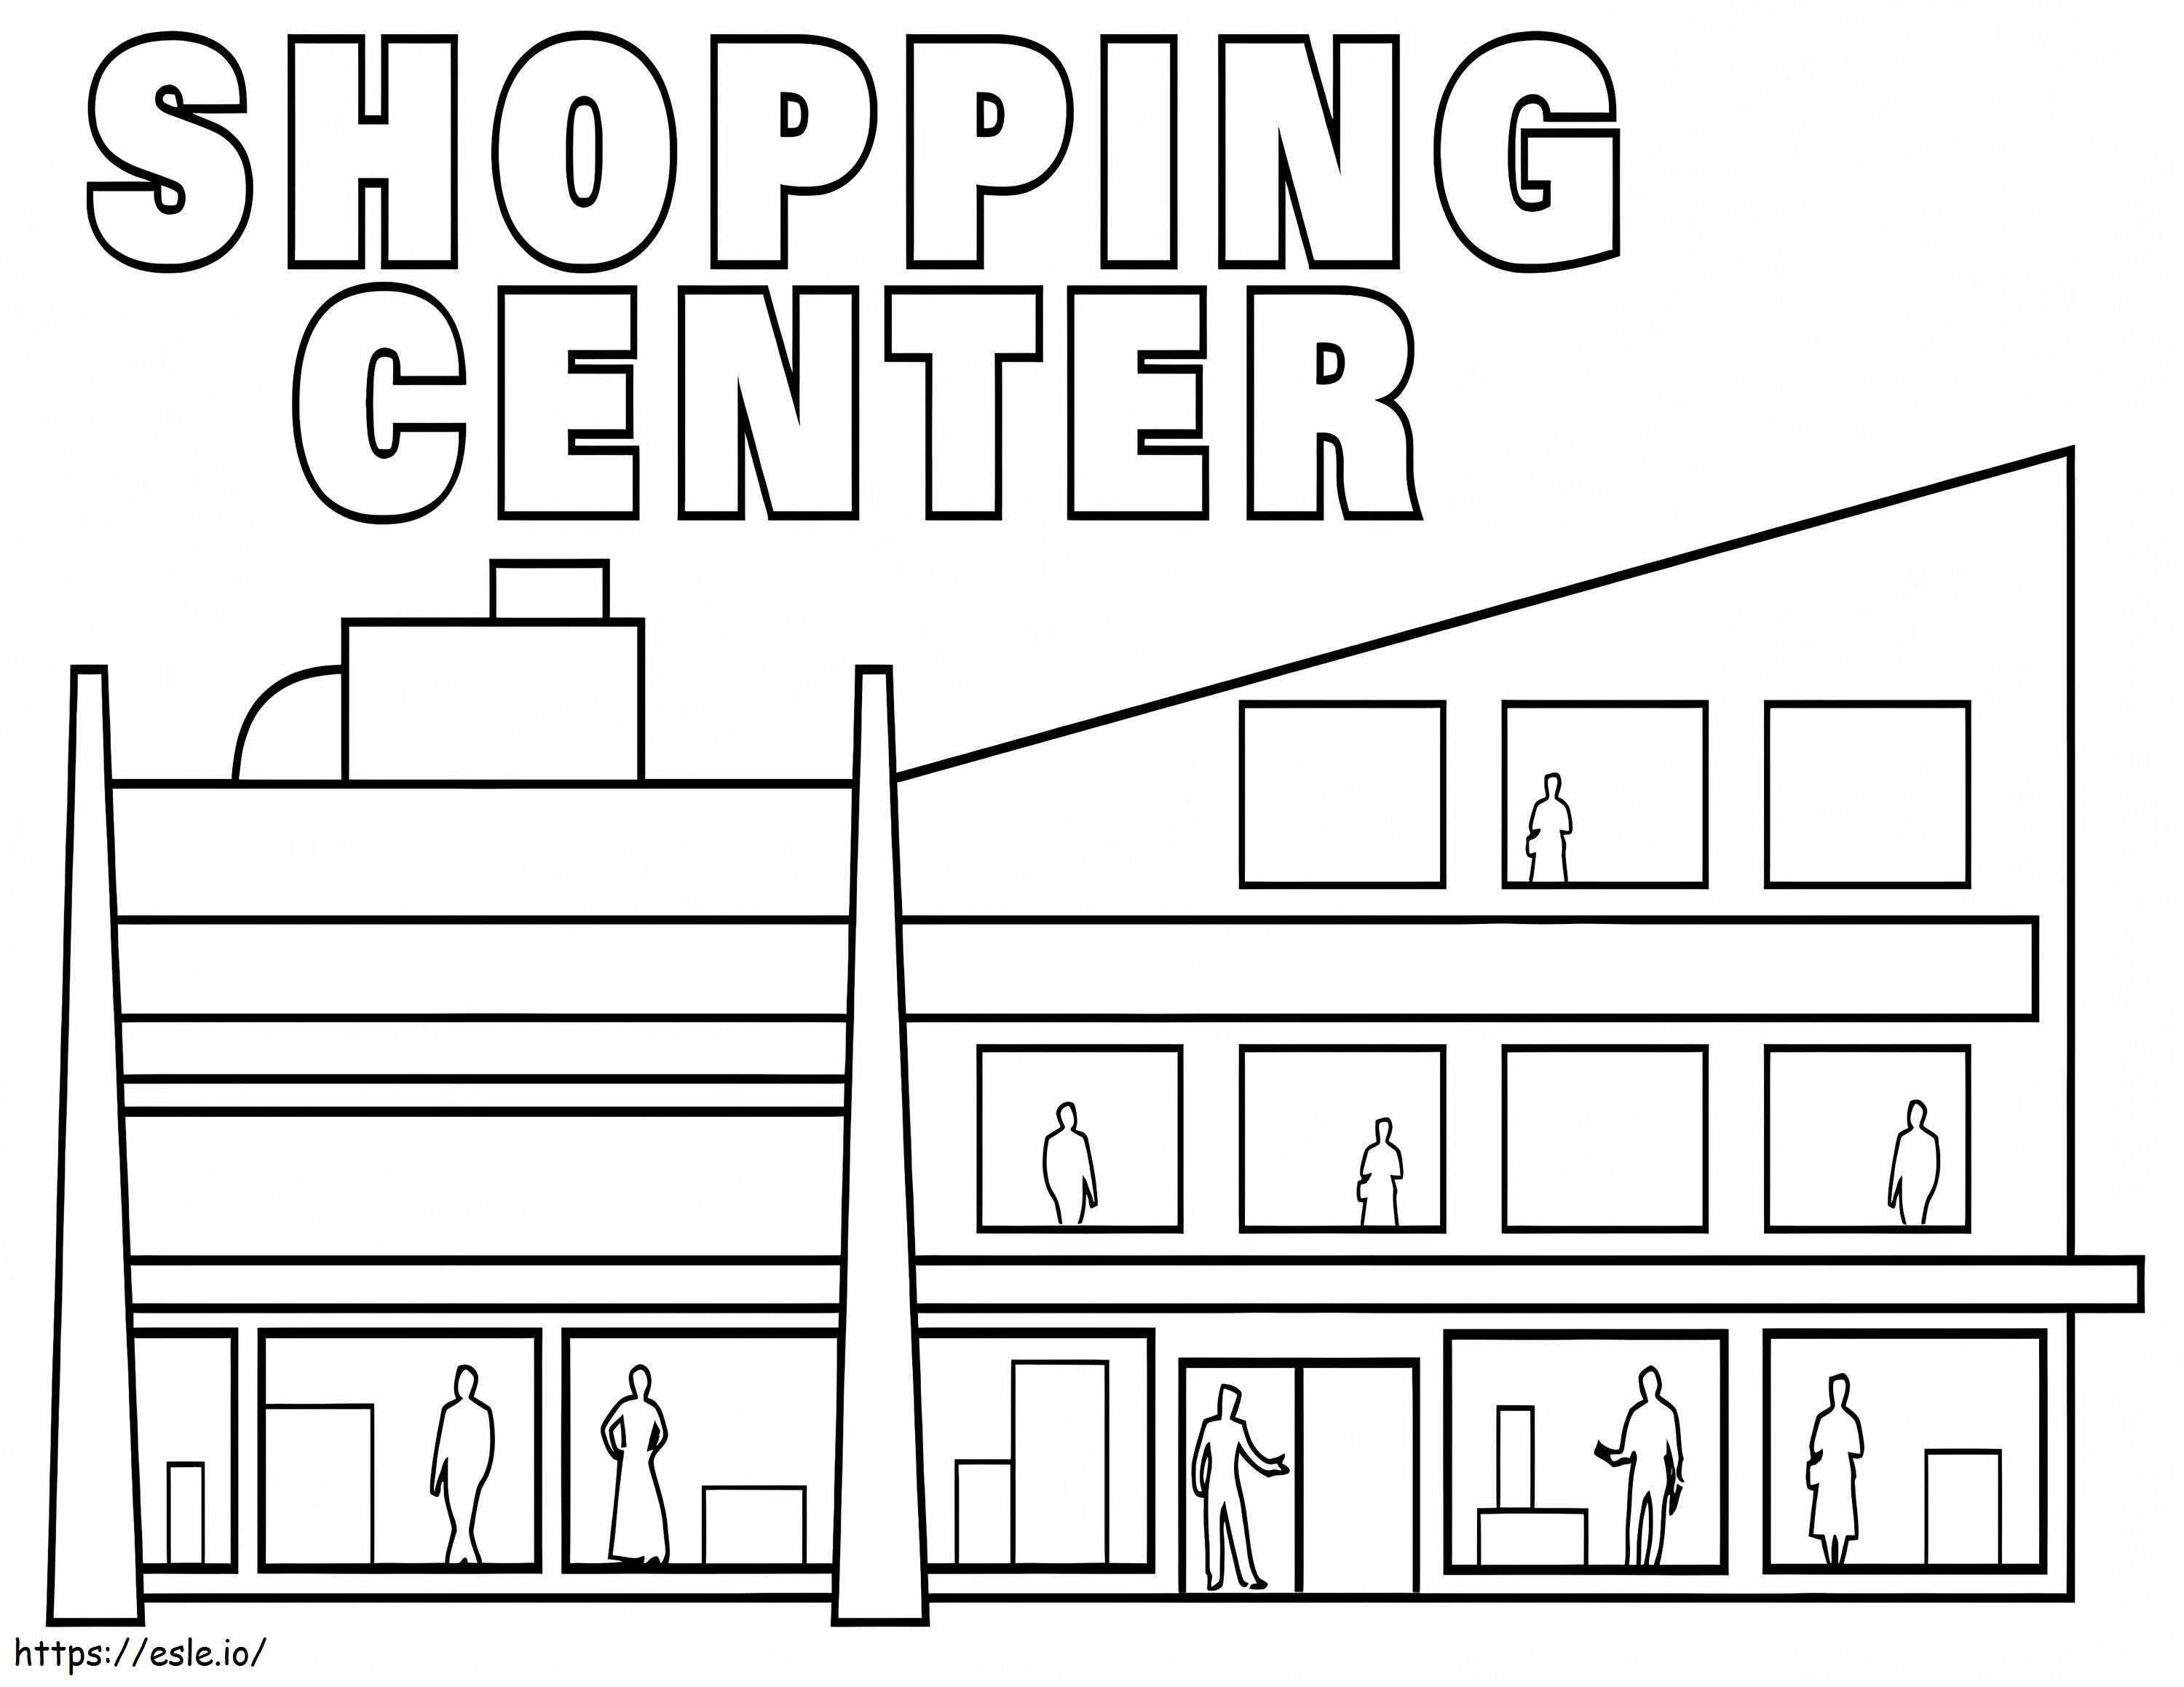 Shopping Center Mall coloring page